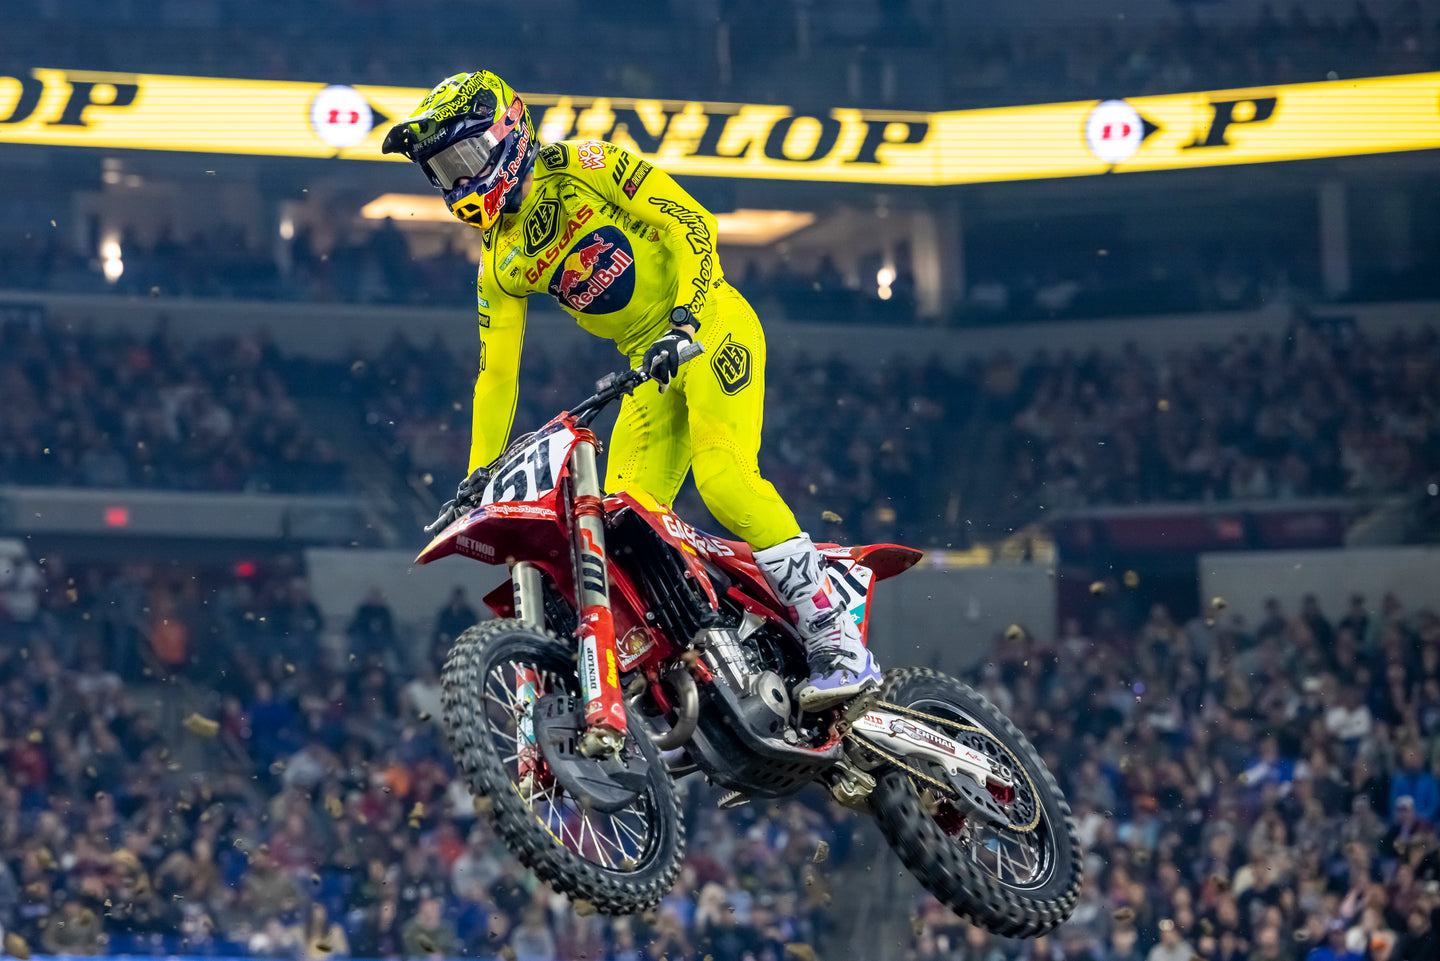 HARD-CHARGING JUSTIN BARCIA AND COOPER WEBB IN THE MIX FOR 450SX VICTORY IN INDIANAPOLIS